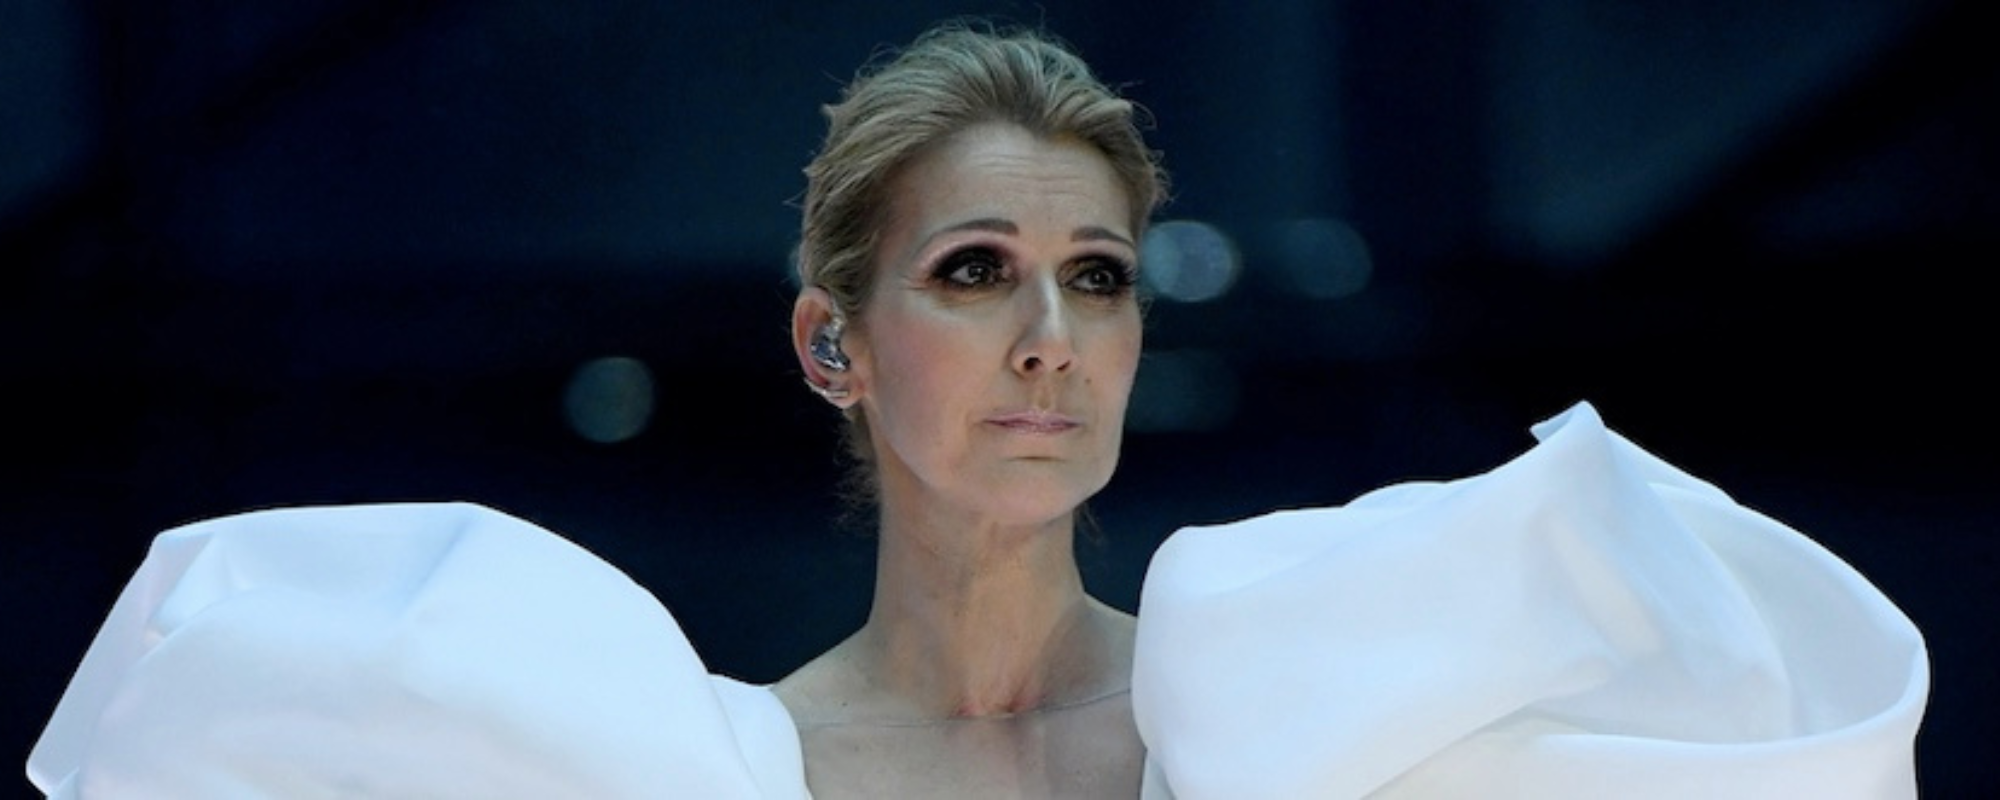 The Top 5 Celine Dion Power Ballads for Experiencing Every One of Your Pent-Up Emotions